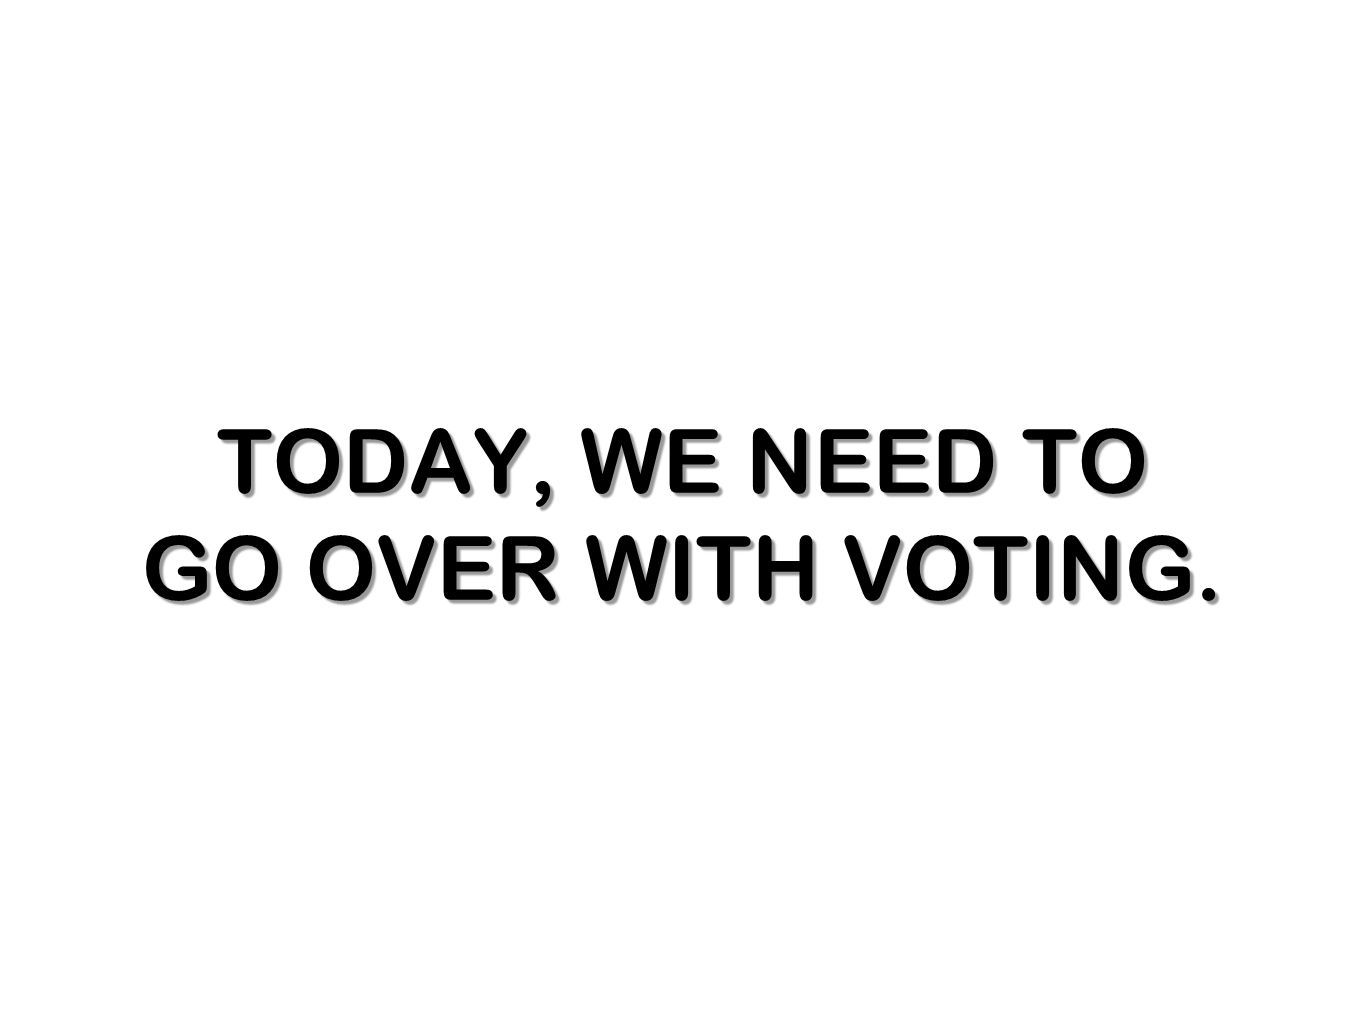 TODAY, WE NEED TO GO OVER WITH VOTING.